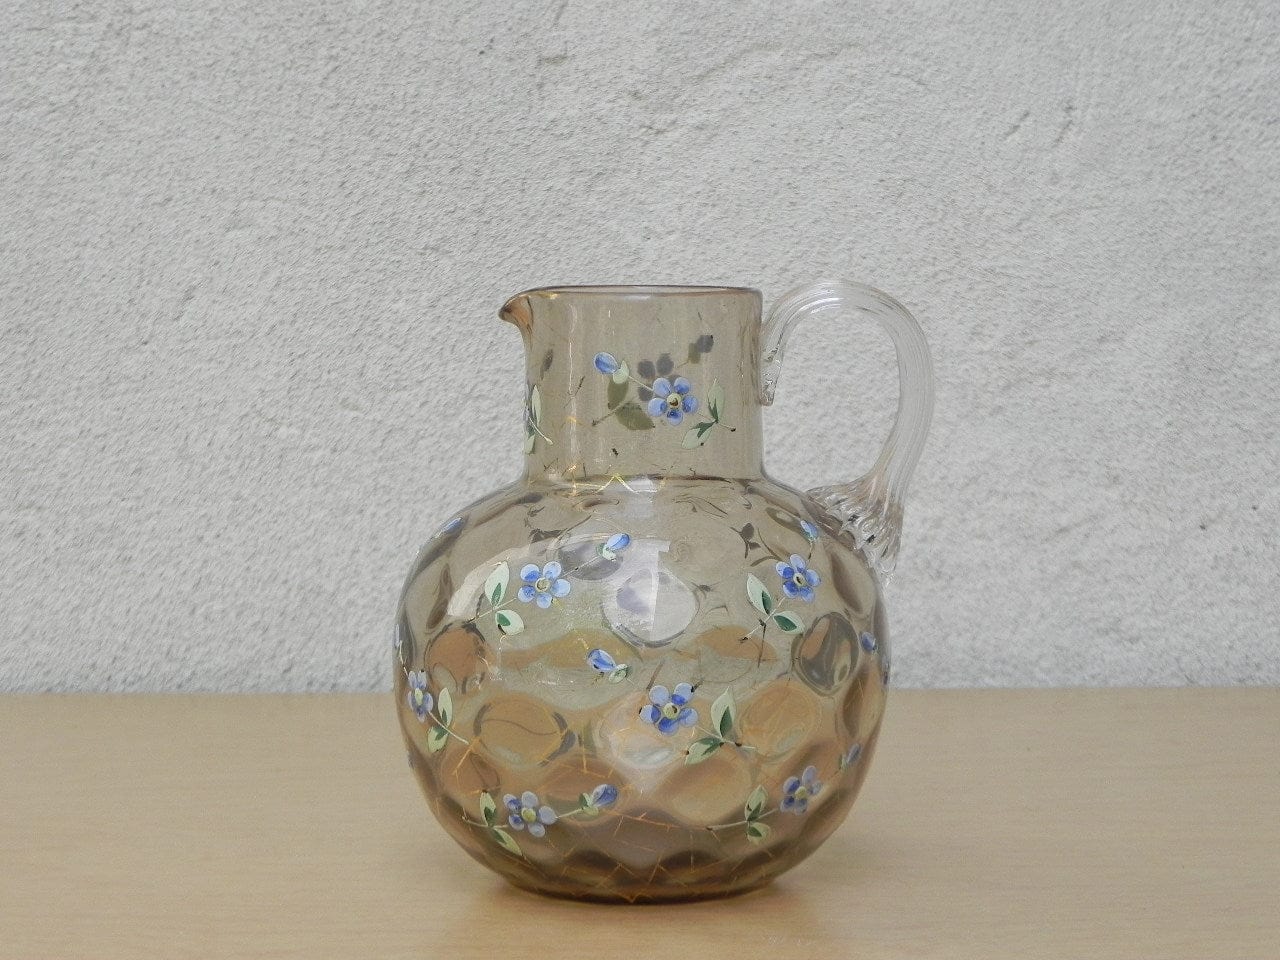 https://www.mikesmcm.com/cdn/shop/files/i-like-mike-s-mid-century-modern-wall-decor-art-small-round-honeycomb-glass-pitcher-with-hand-painted-blue-flowers-6863814721624_2000x.JPG?v=1690339152